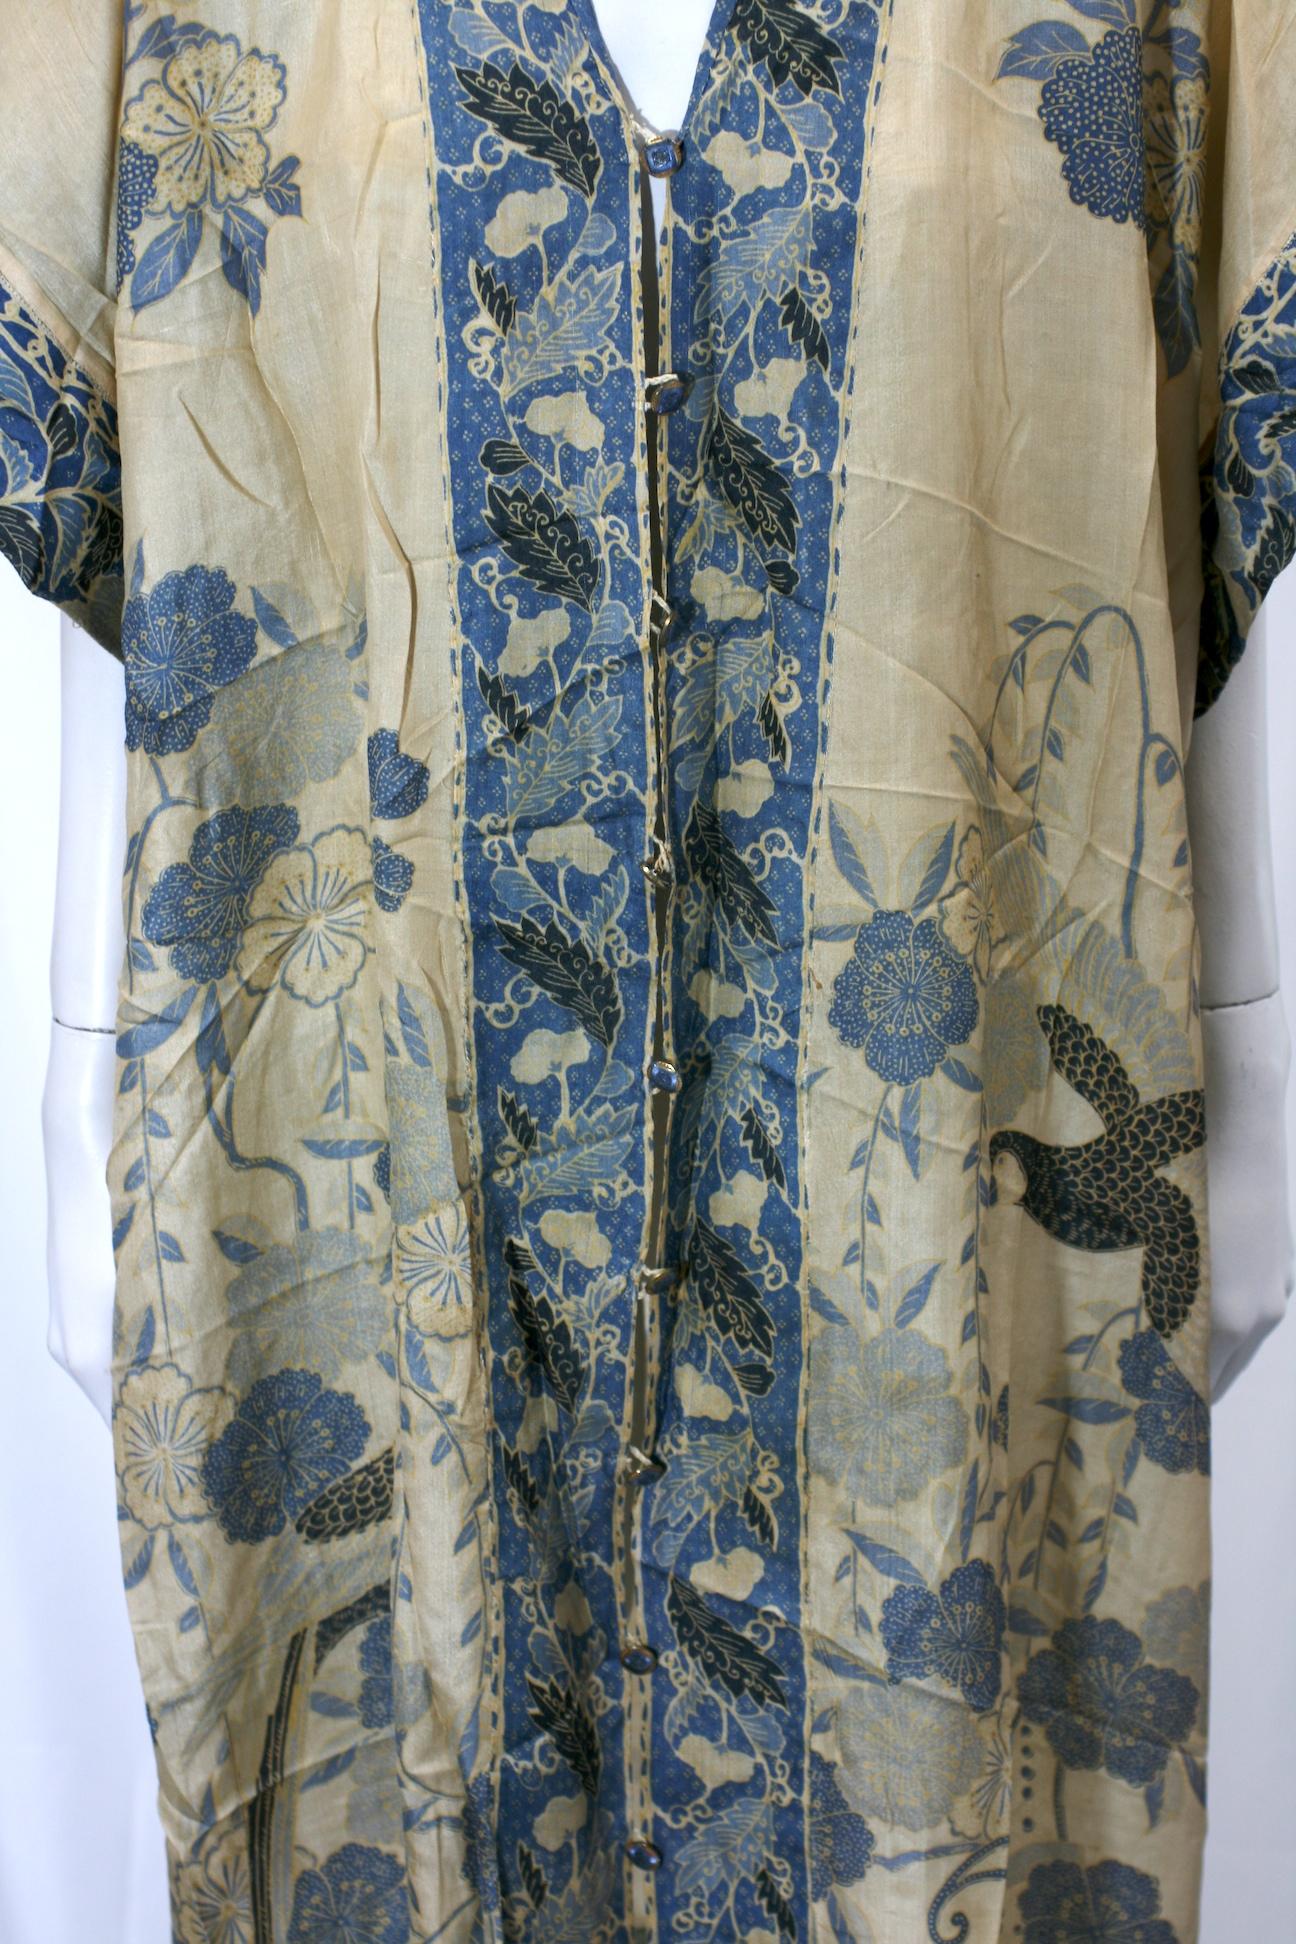 Printed silk pongee Art Deco lounging kimono of Japanese manufacture for the western market 1920s. The tan ground unusually printed in blues and black imitating japans blue and white porcelain.
Wonderful unusual printed bird motifs. Unusual front